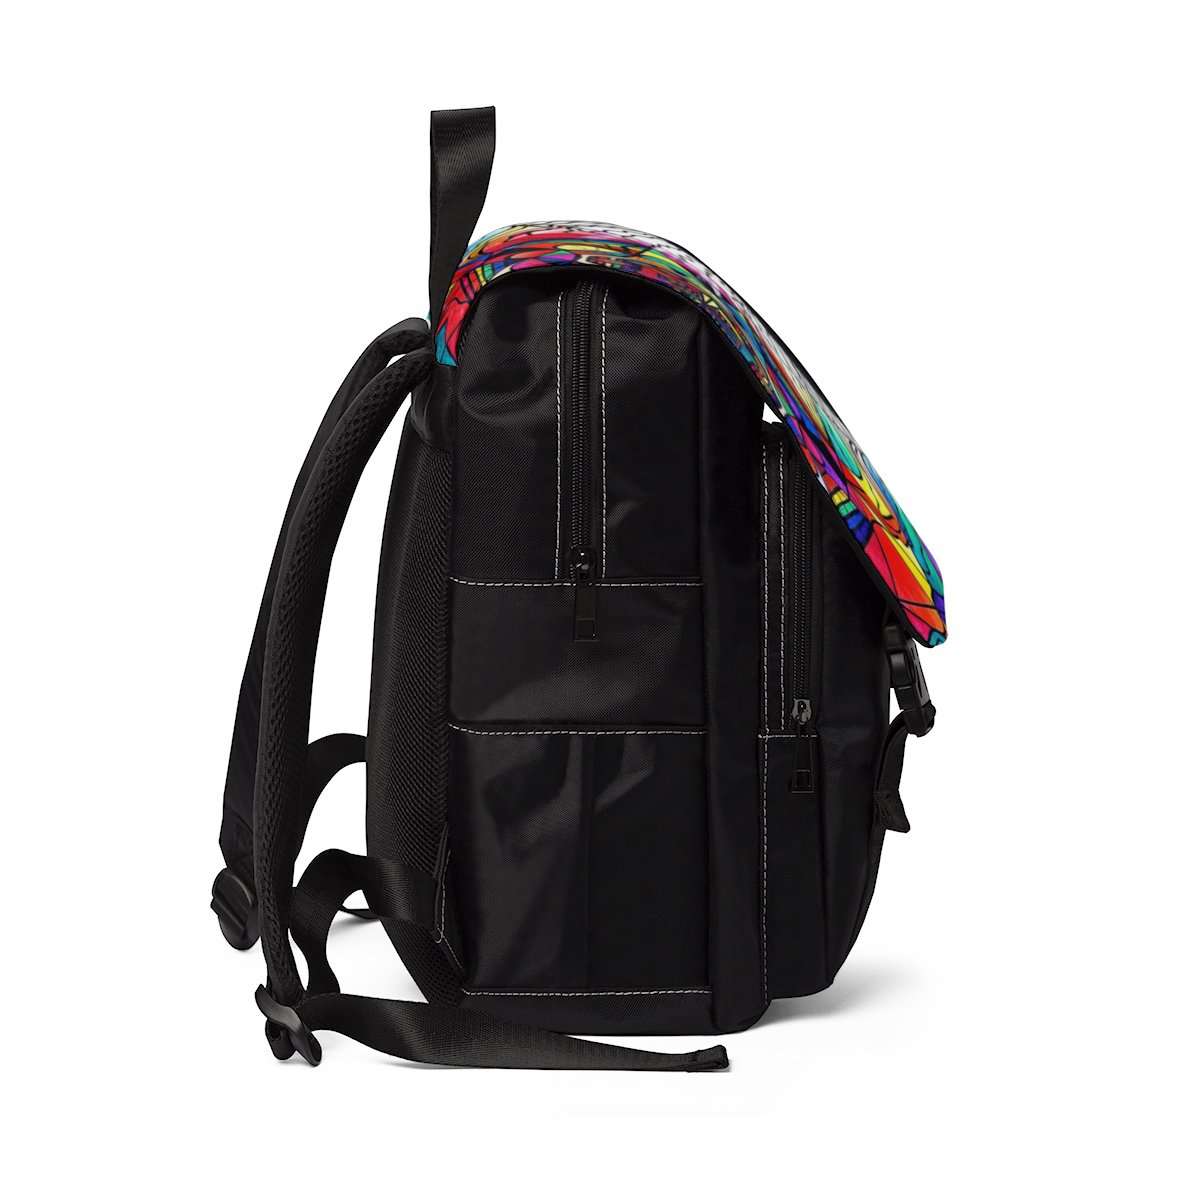 shop-the-official-online-store-of-return-to-source-unisex-casual-shoulder-backpack-on-sale_1.jpg